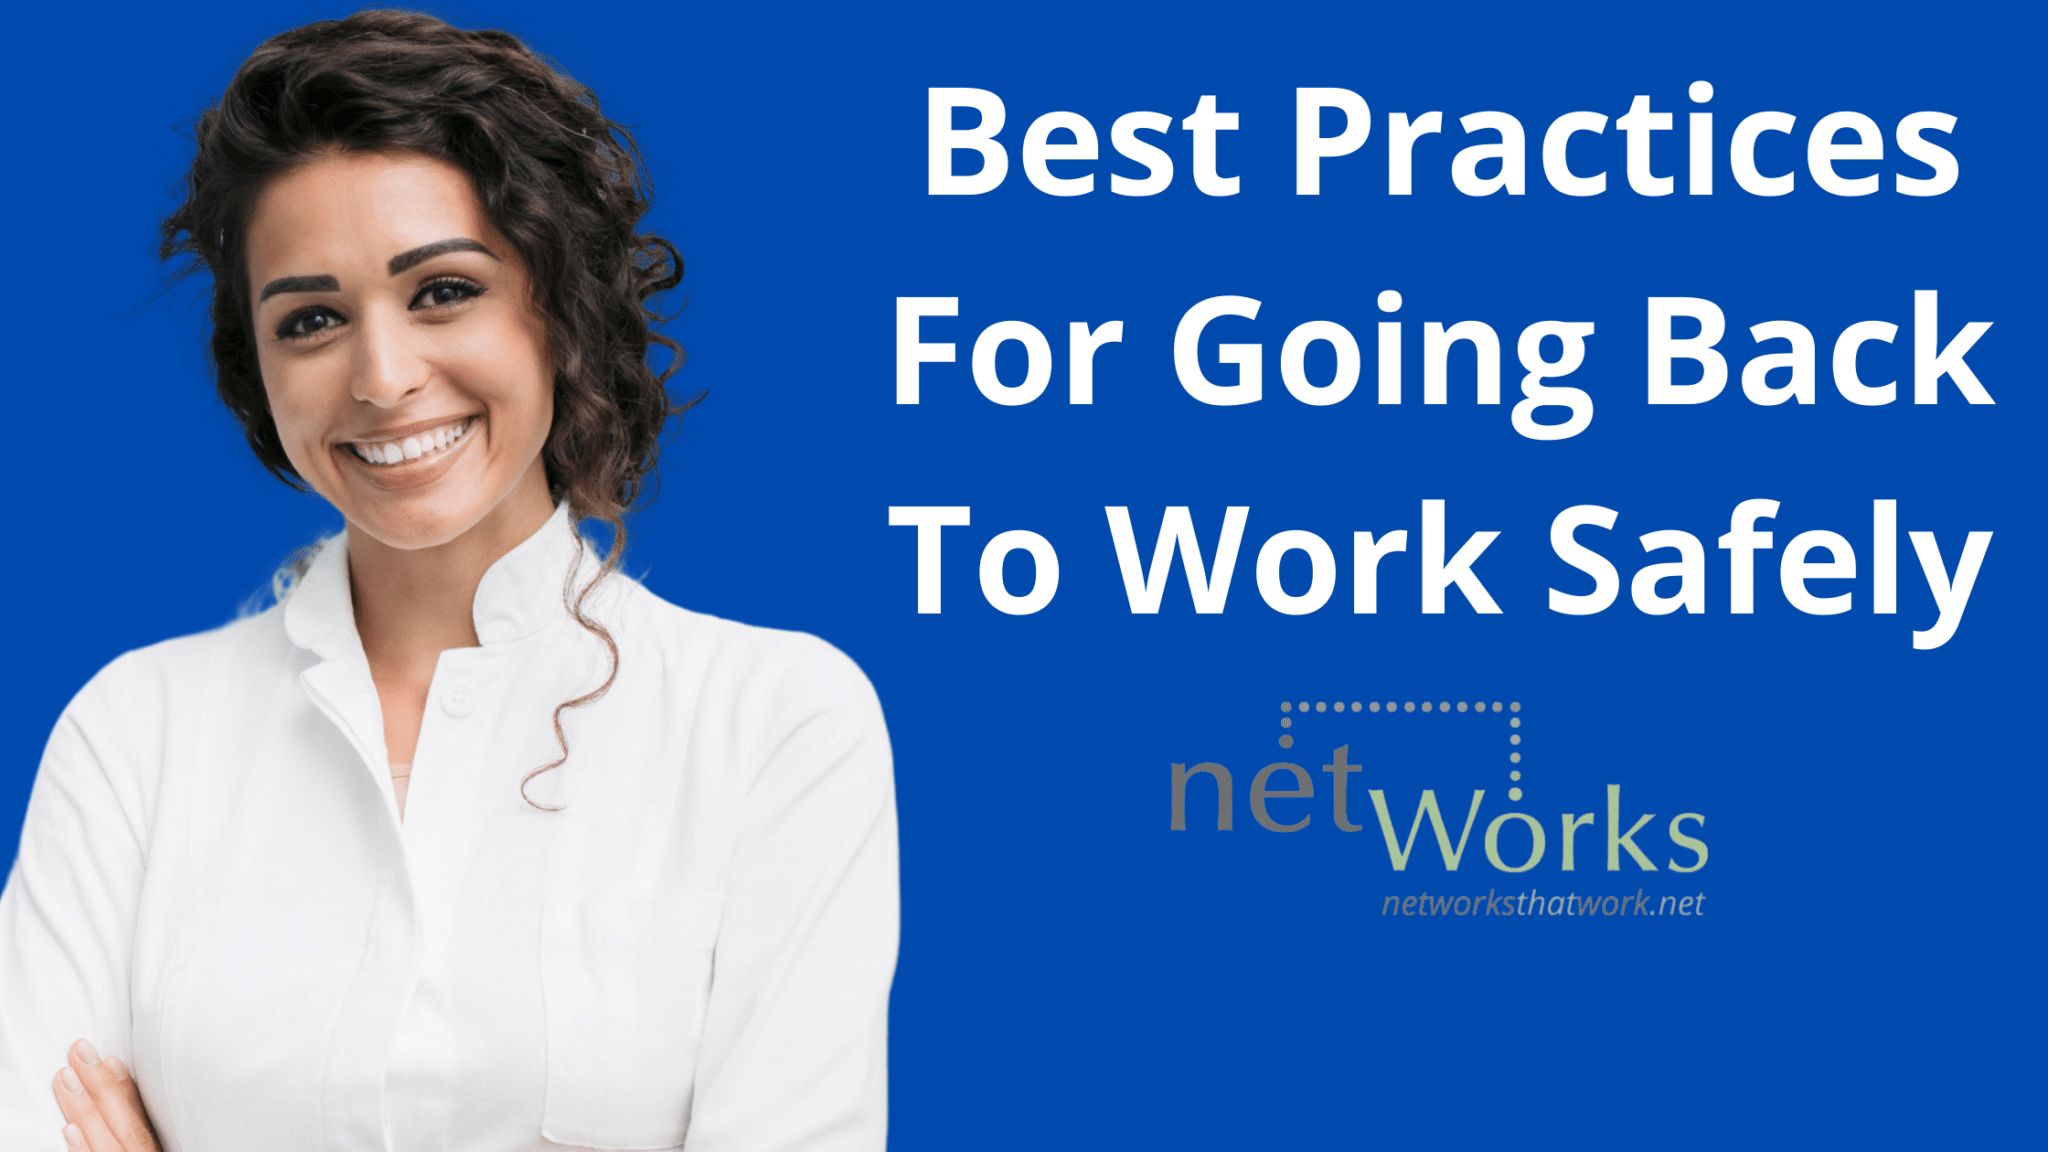 Best Practices For Going Back To Work Safely